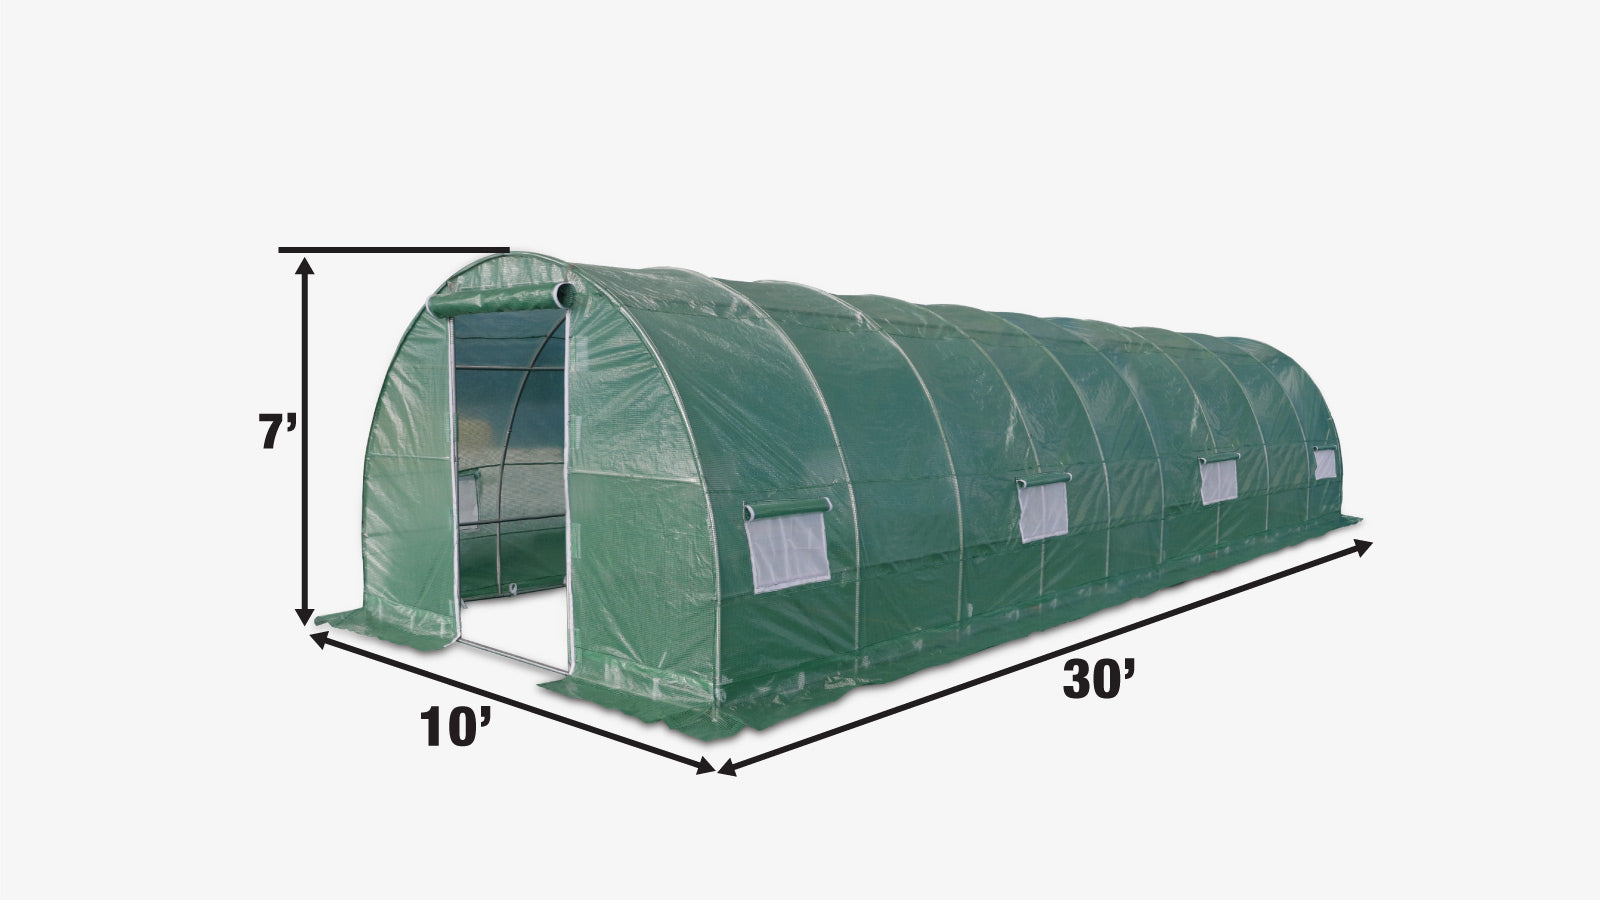 TMG Industrial 10’ x 30’ Tunnel Greenhouse Grow Tent w/Ripstop Leno Cover, Cold Frame, Roll-Up Mesh Windows, Round Top Roof, TMG-GH1030R-specifications-image